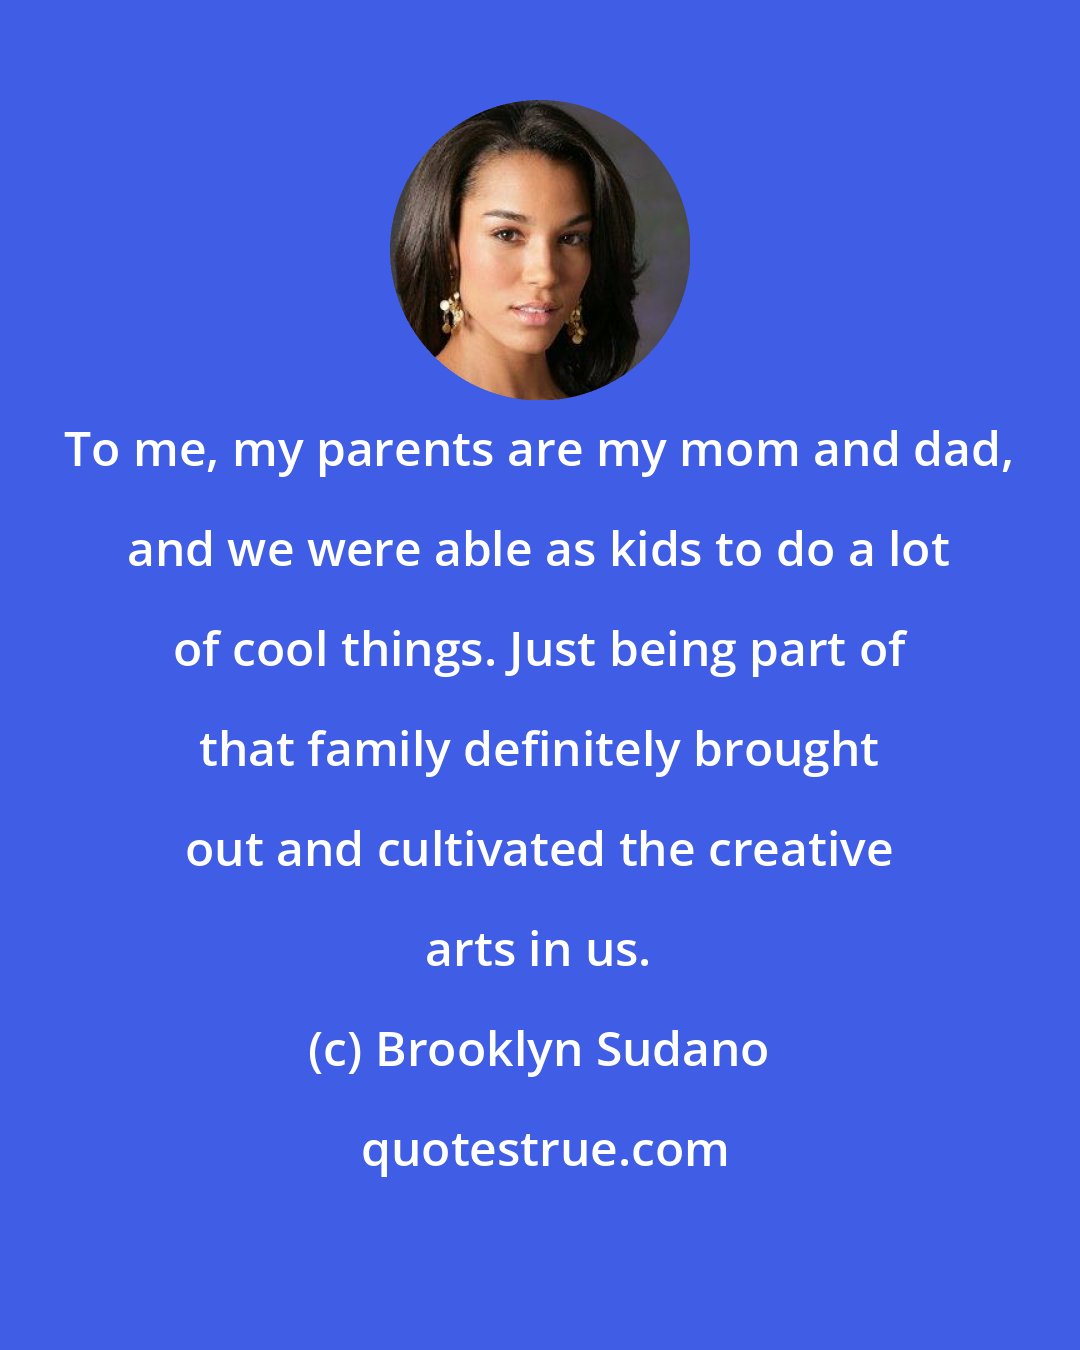 Brooklyn Sudano: To me, my parents are my mom and dad, and we were able as kids to do a lot of cool things. Just being part of that family definitely brought out and cultivated the creative arts in us.